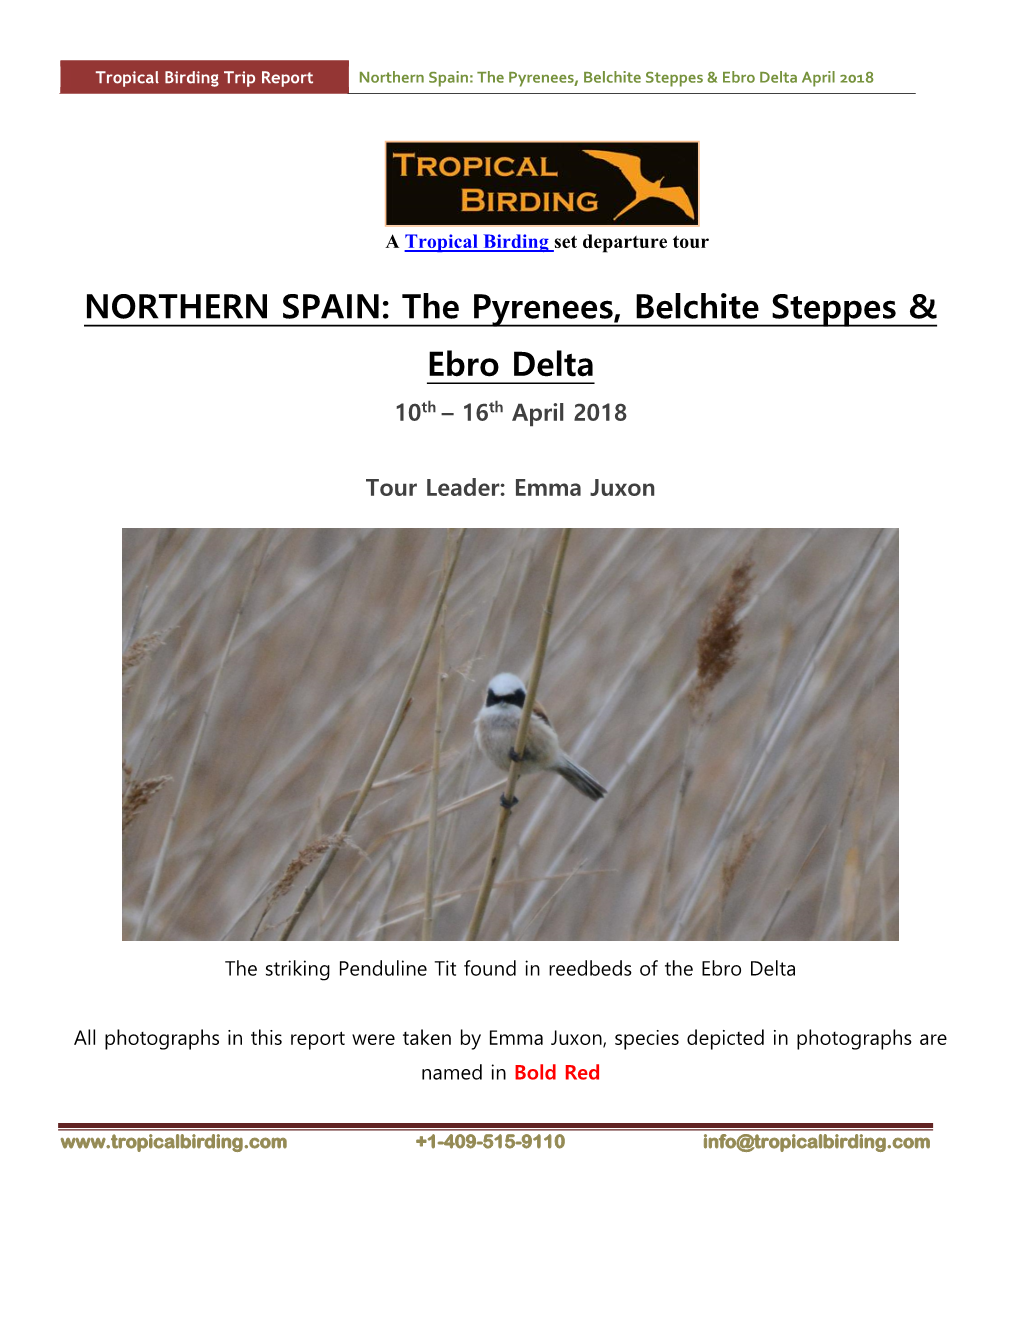 NORTHERN SPAIN: the Pyrenees, Belchite Steppes & Ebro Delta